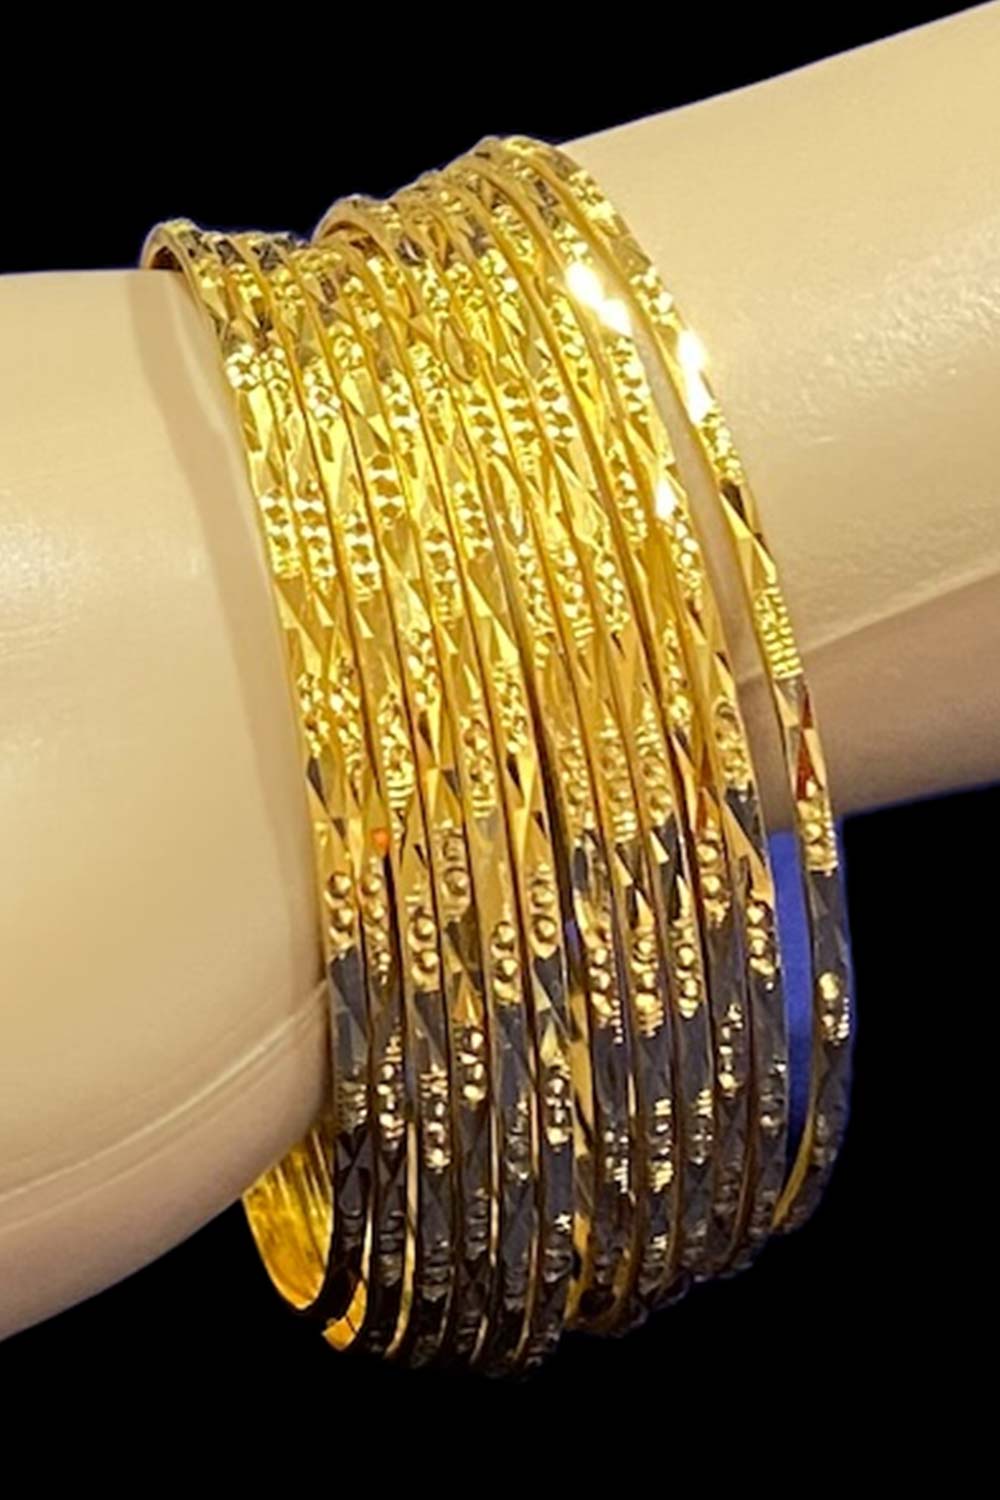 Gold Bangles with Classic Design - Set of 12